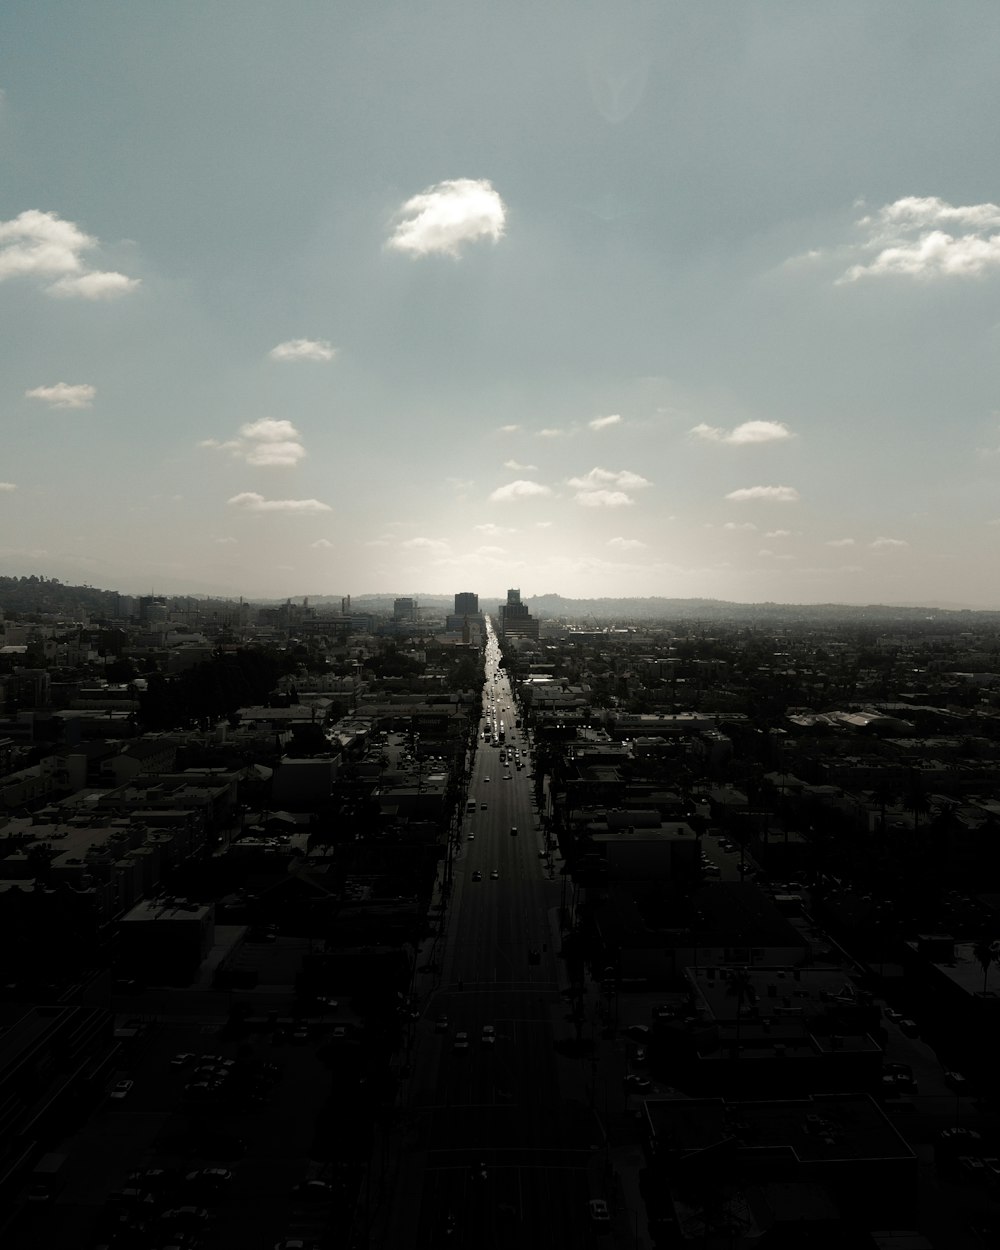 grayscale photography of city with high-rise buildings viewing road